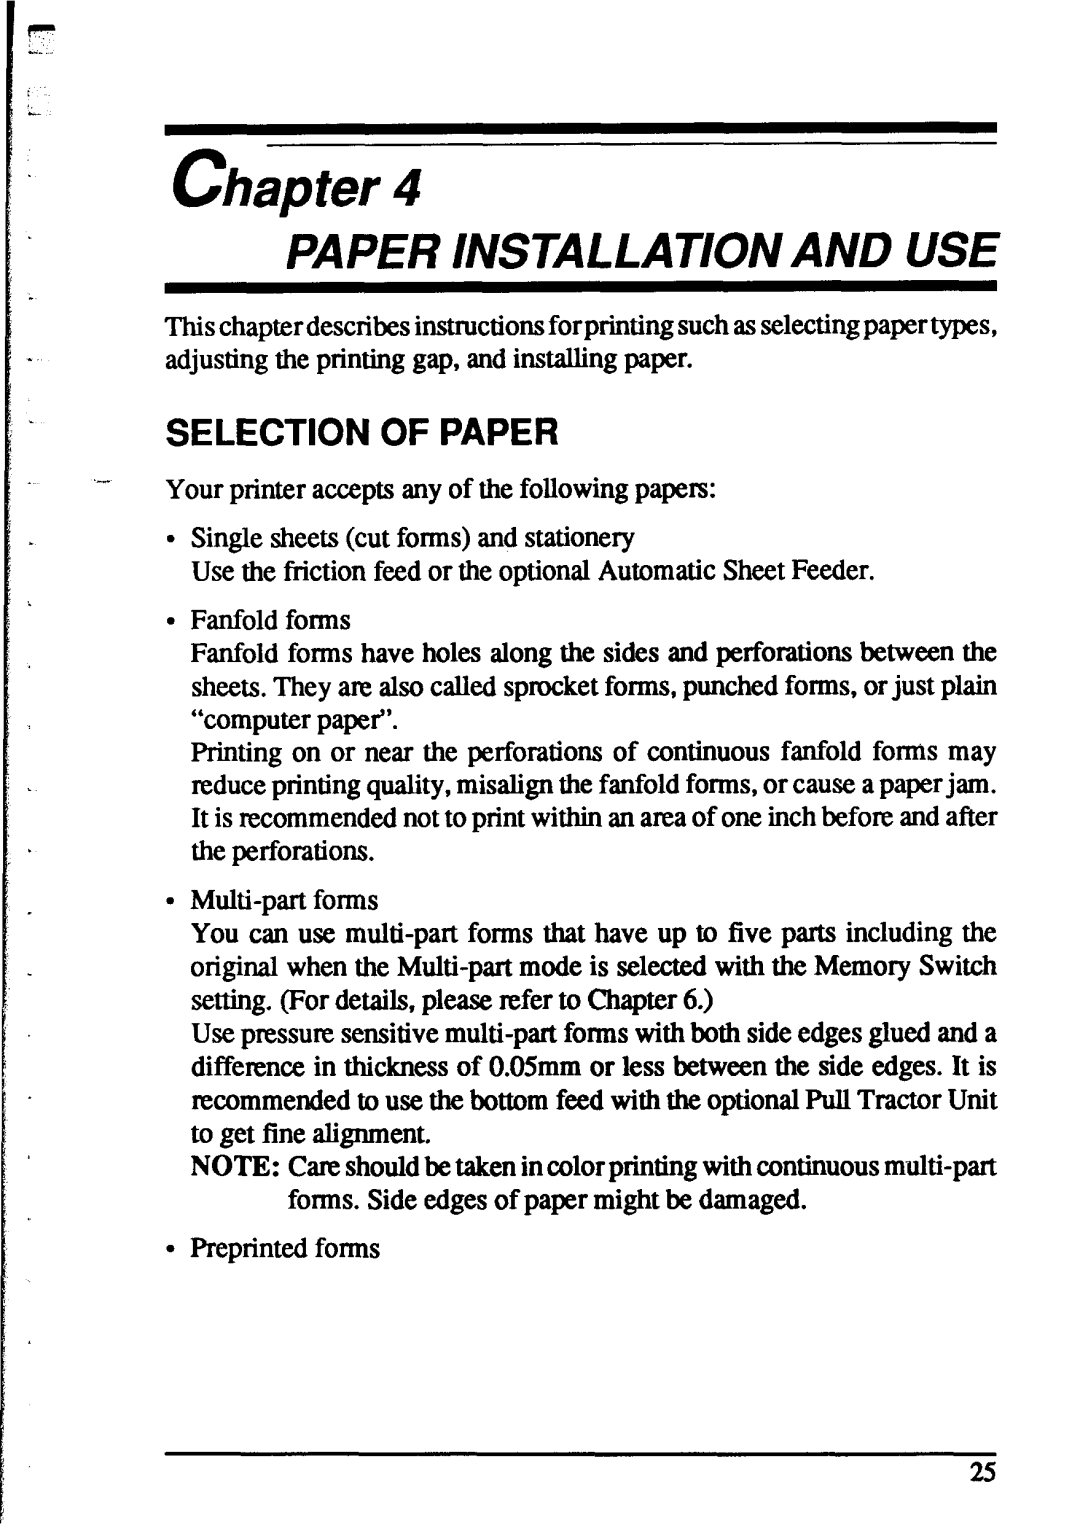 Star Micronics XR-1520, XR-1020 manual Paper Installationand Use, Selection Of Paper, chapter 